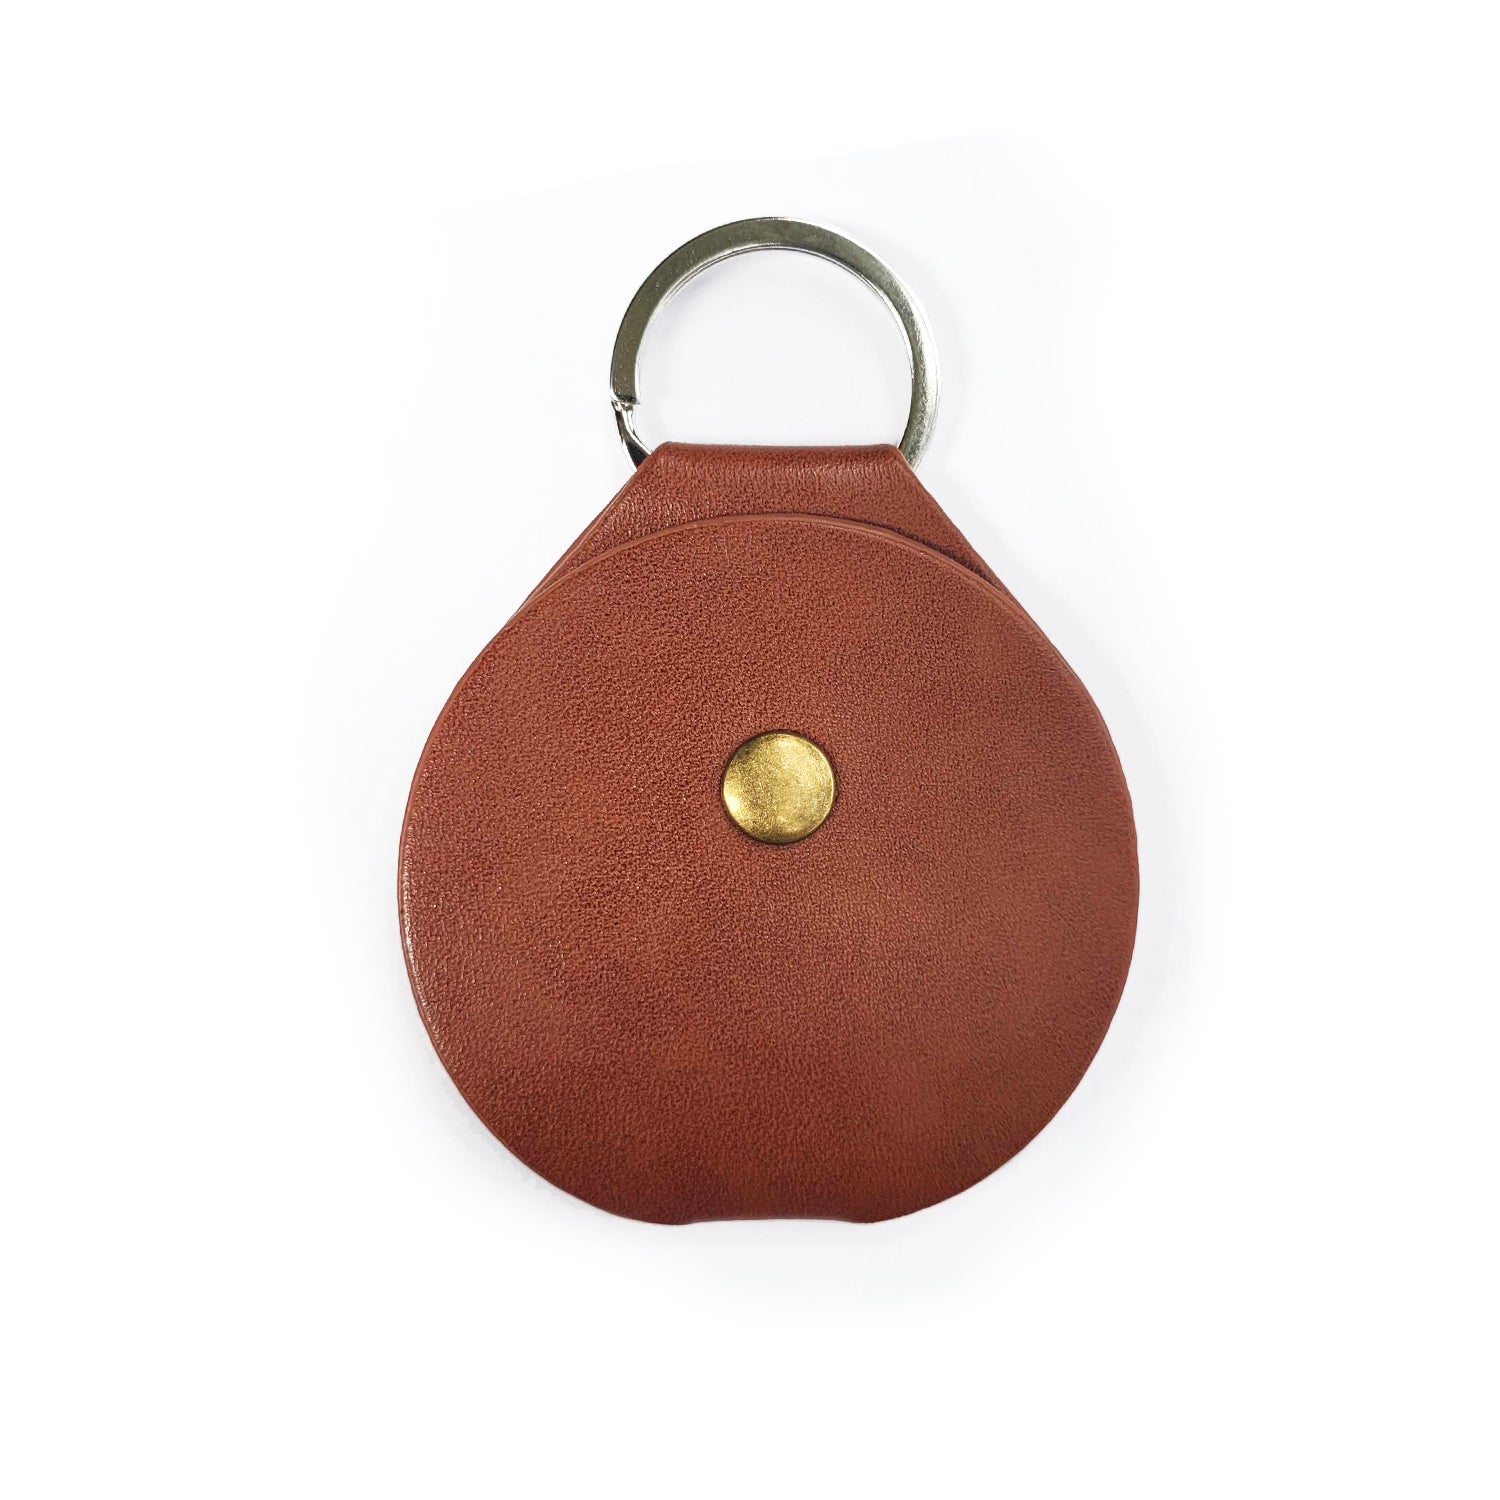 A round, leathery coin holder with a key ring at the top. In the center is a brass button that fastens the coin holder.